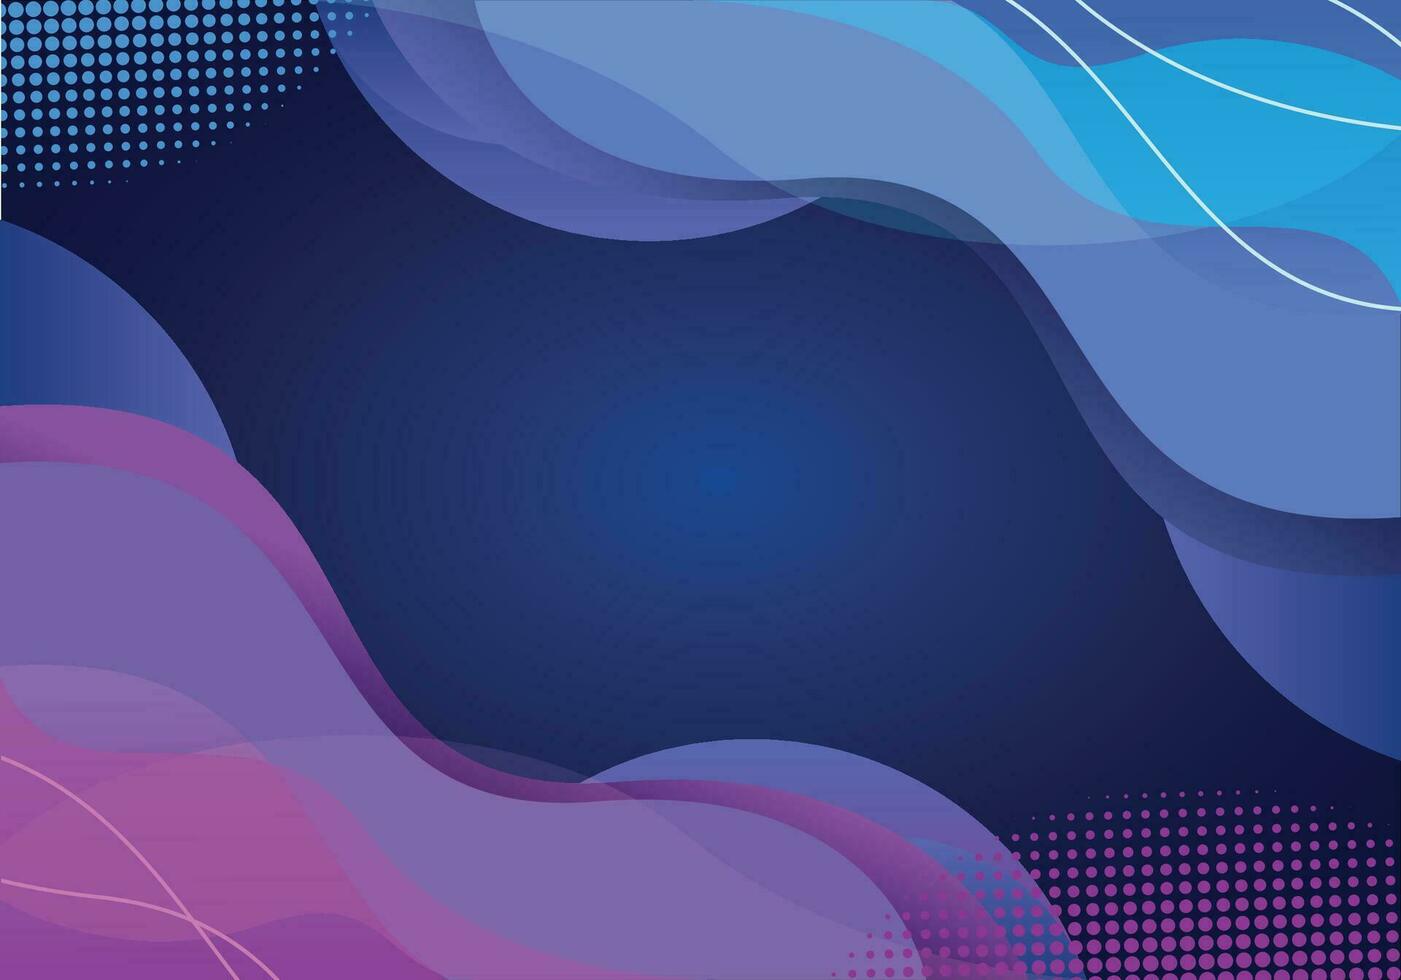 Elegant curved background full of shapes in blue and purple vector